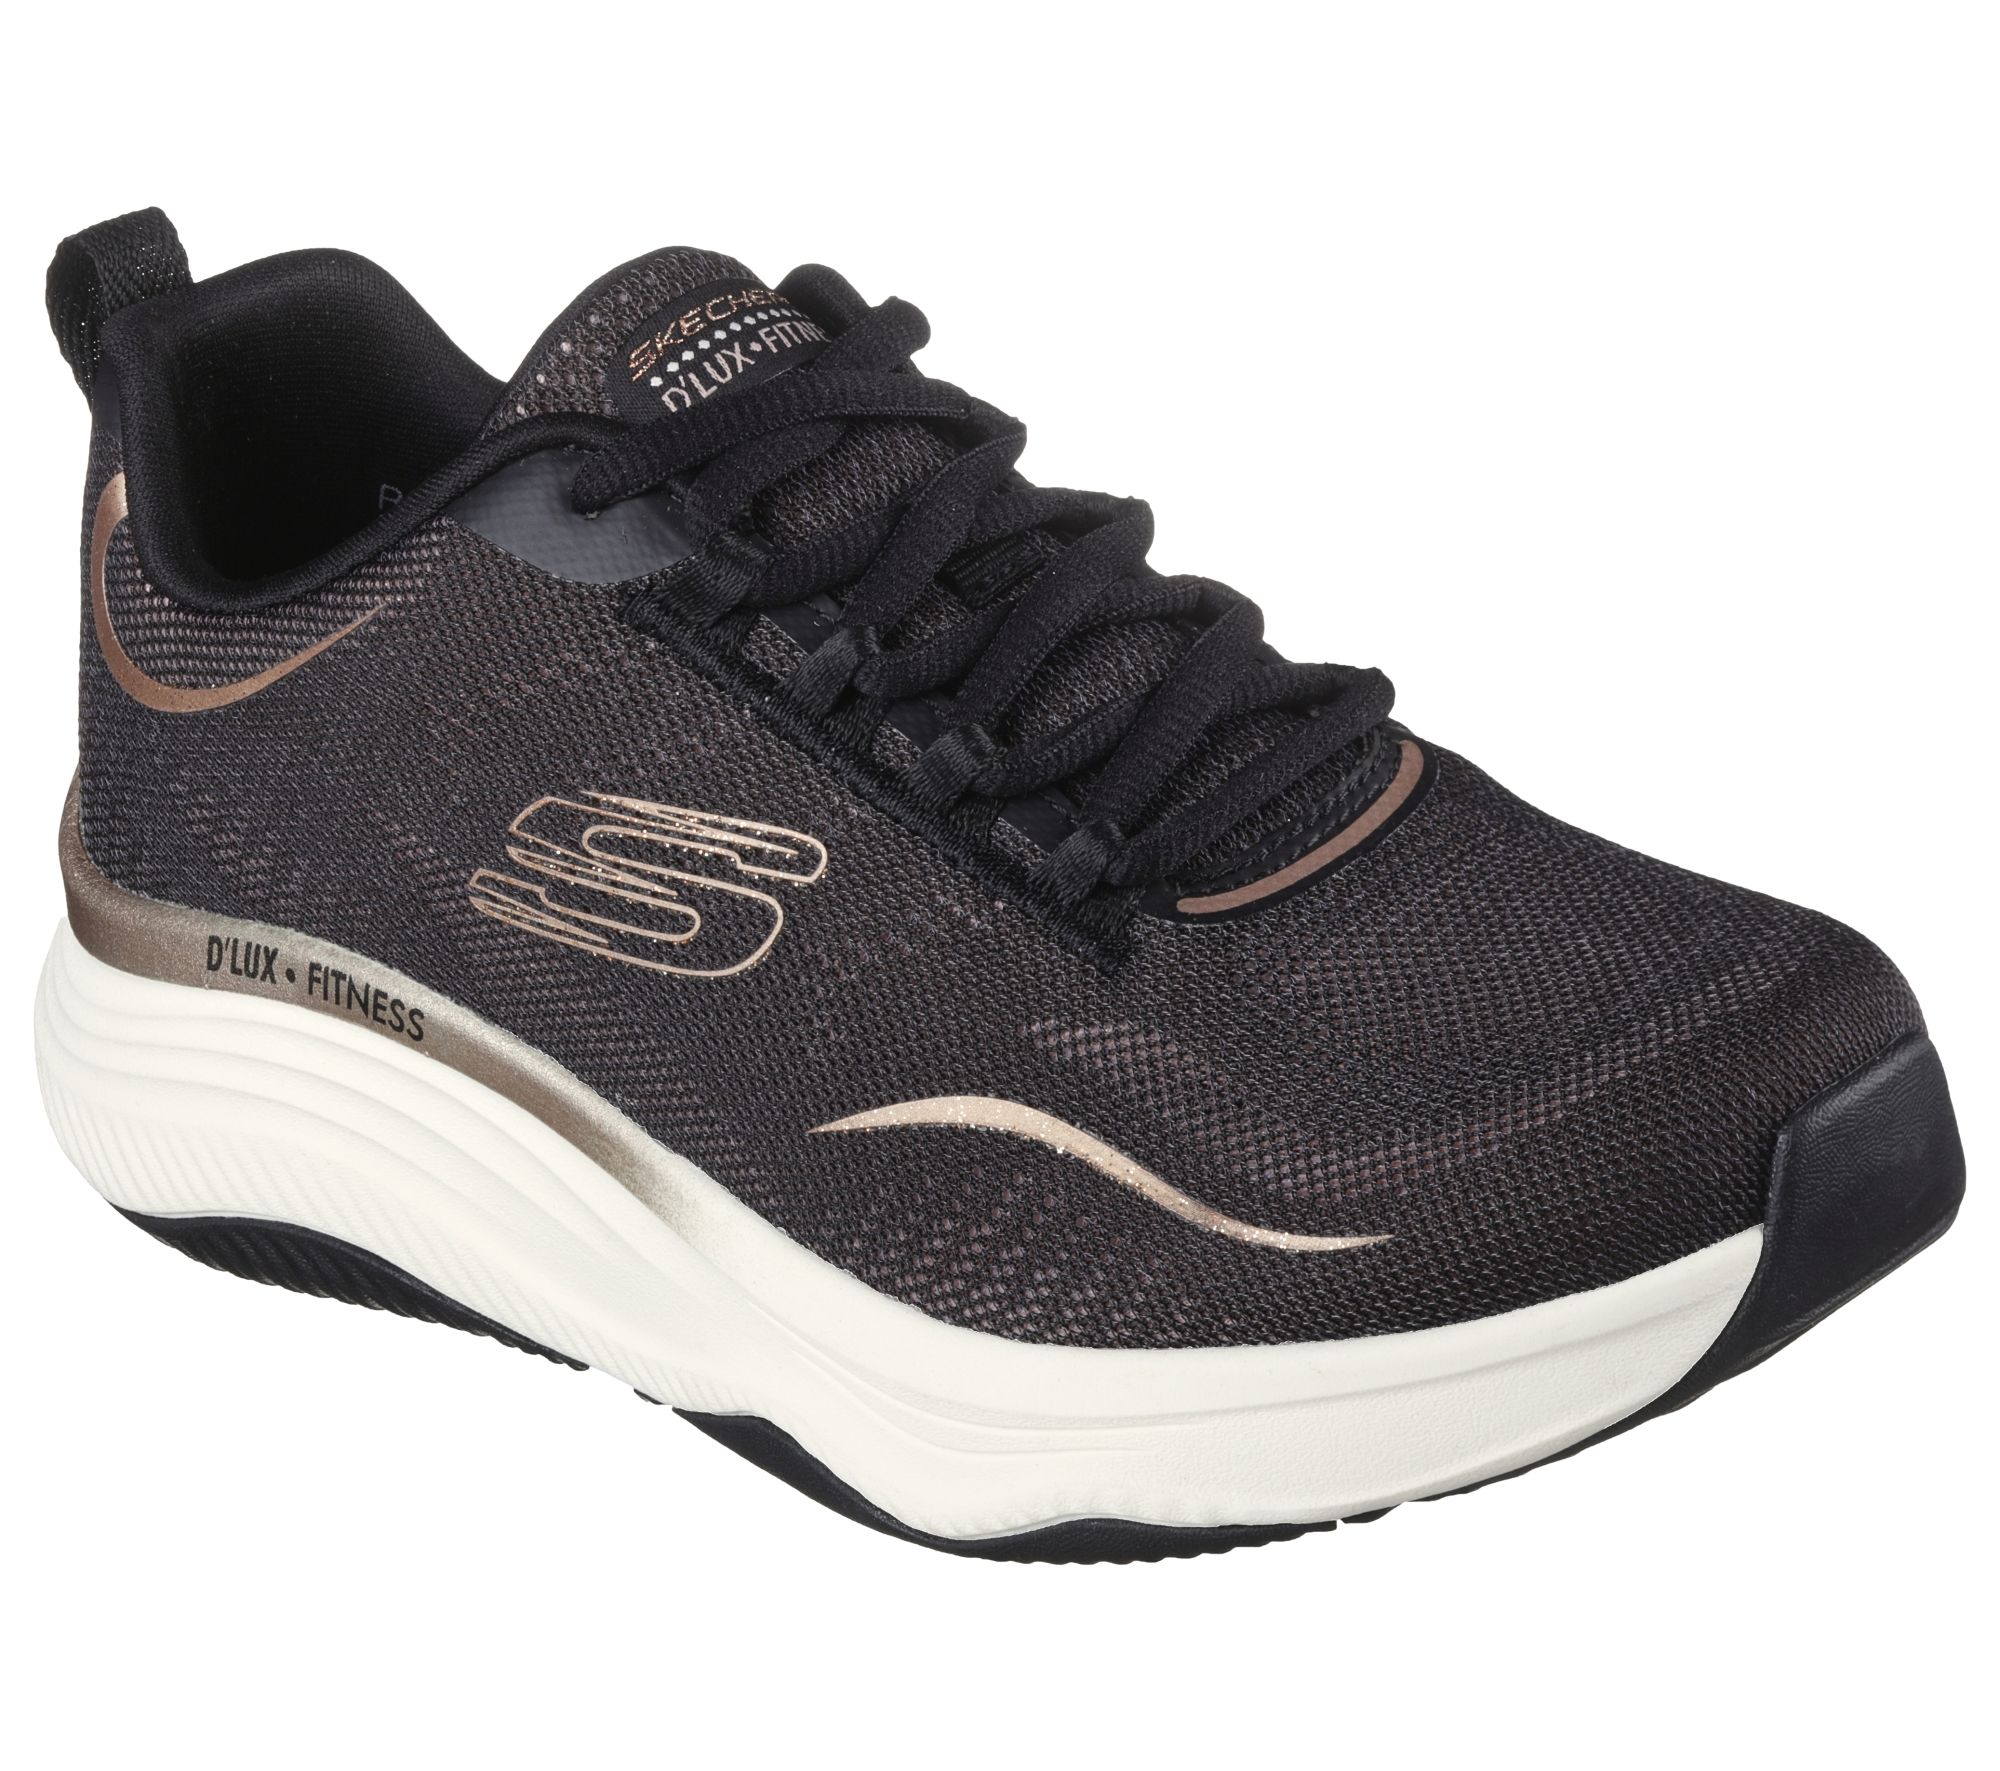 SKECHERS D'Lux Fitness - Pure Glam 149837 BKRG